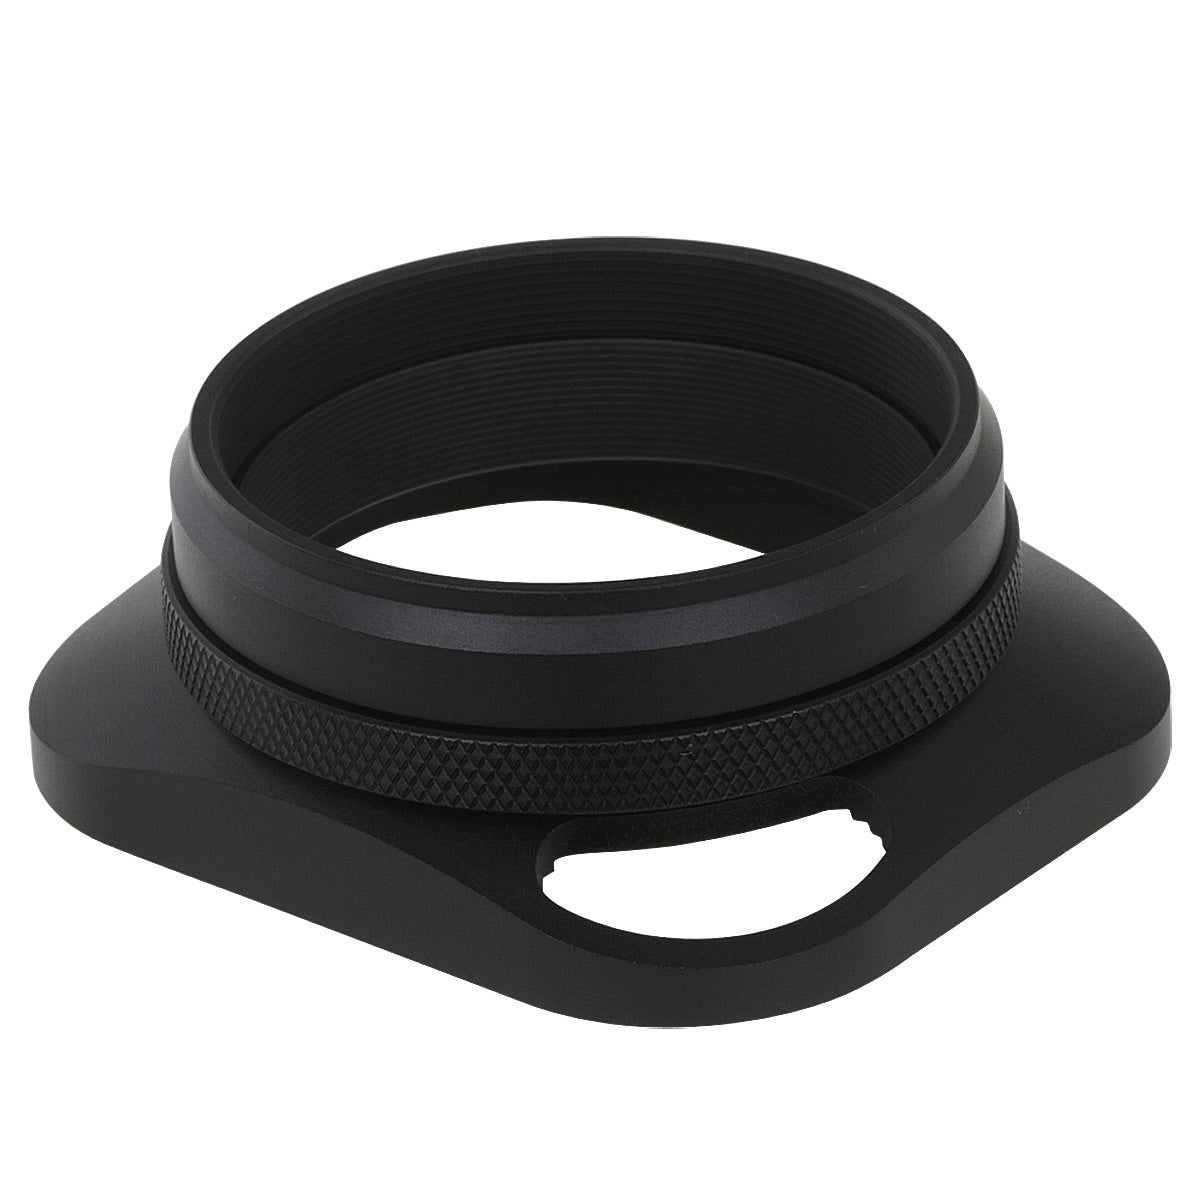 Haoge LH-E3P Square Metal Lens Hood Hollow Out Designed with 49mm Adapter Ring with Cap for Fujifilm Fuji FinePix X100 X100S X100T X70 X100F X100V Camera Replaces LH-X100 AR-X100 LH-X70 Black